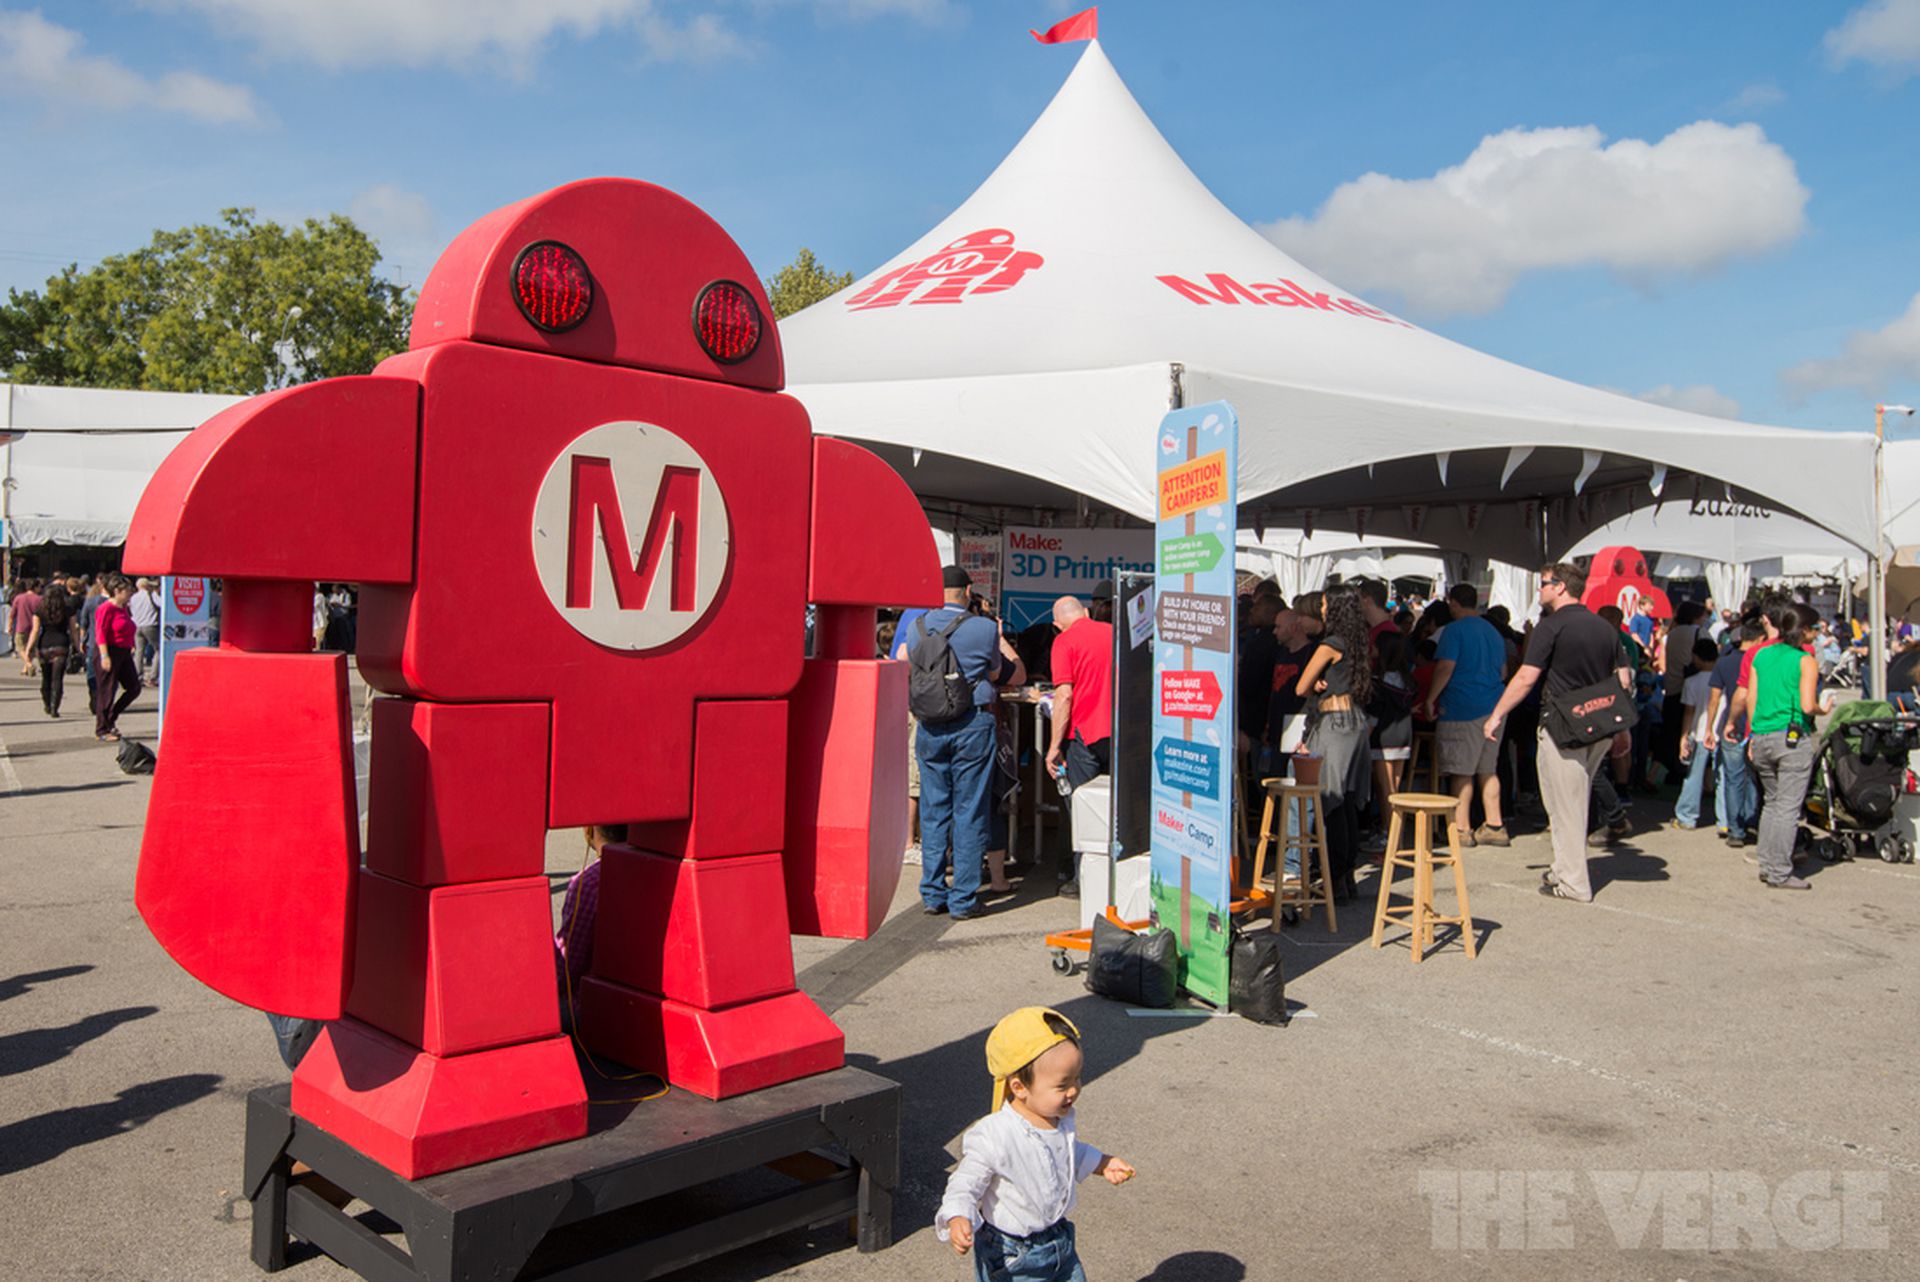 At Maker Faire New York, the DIY movement pushes into the mainstream